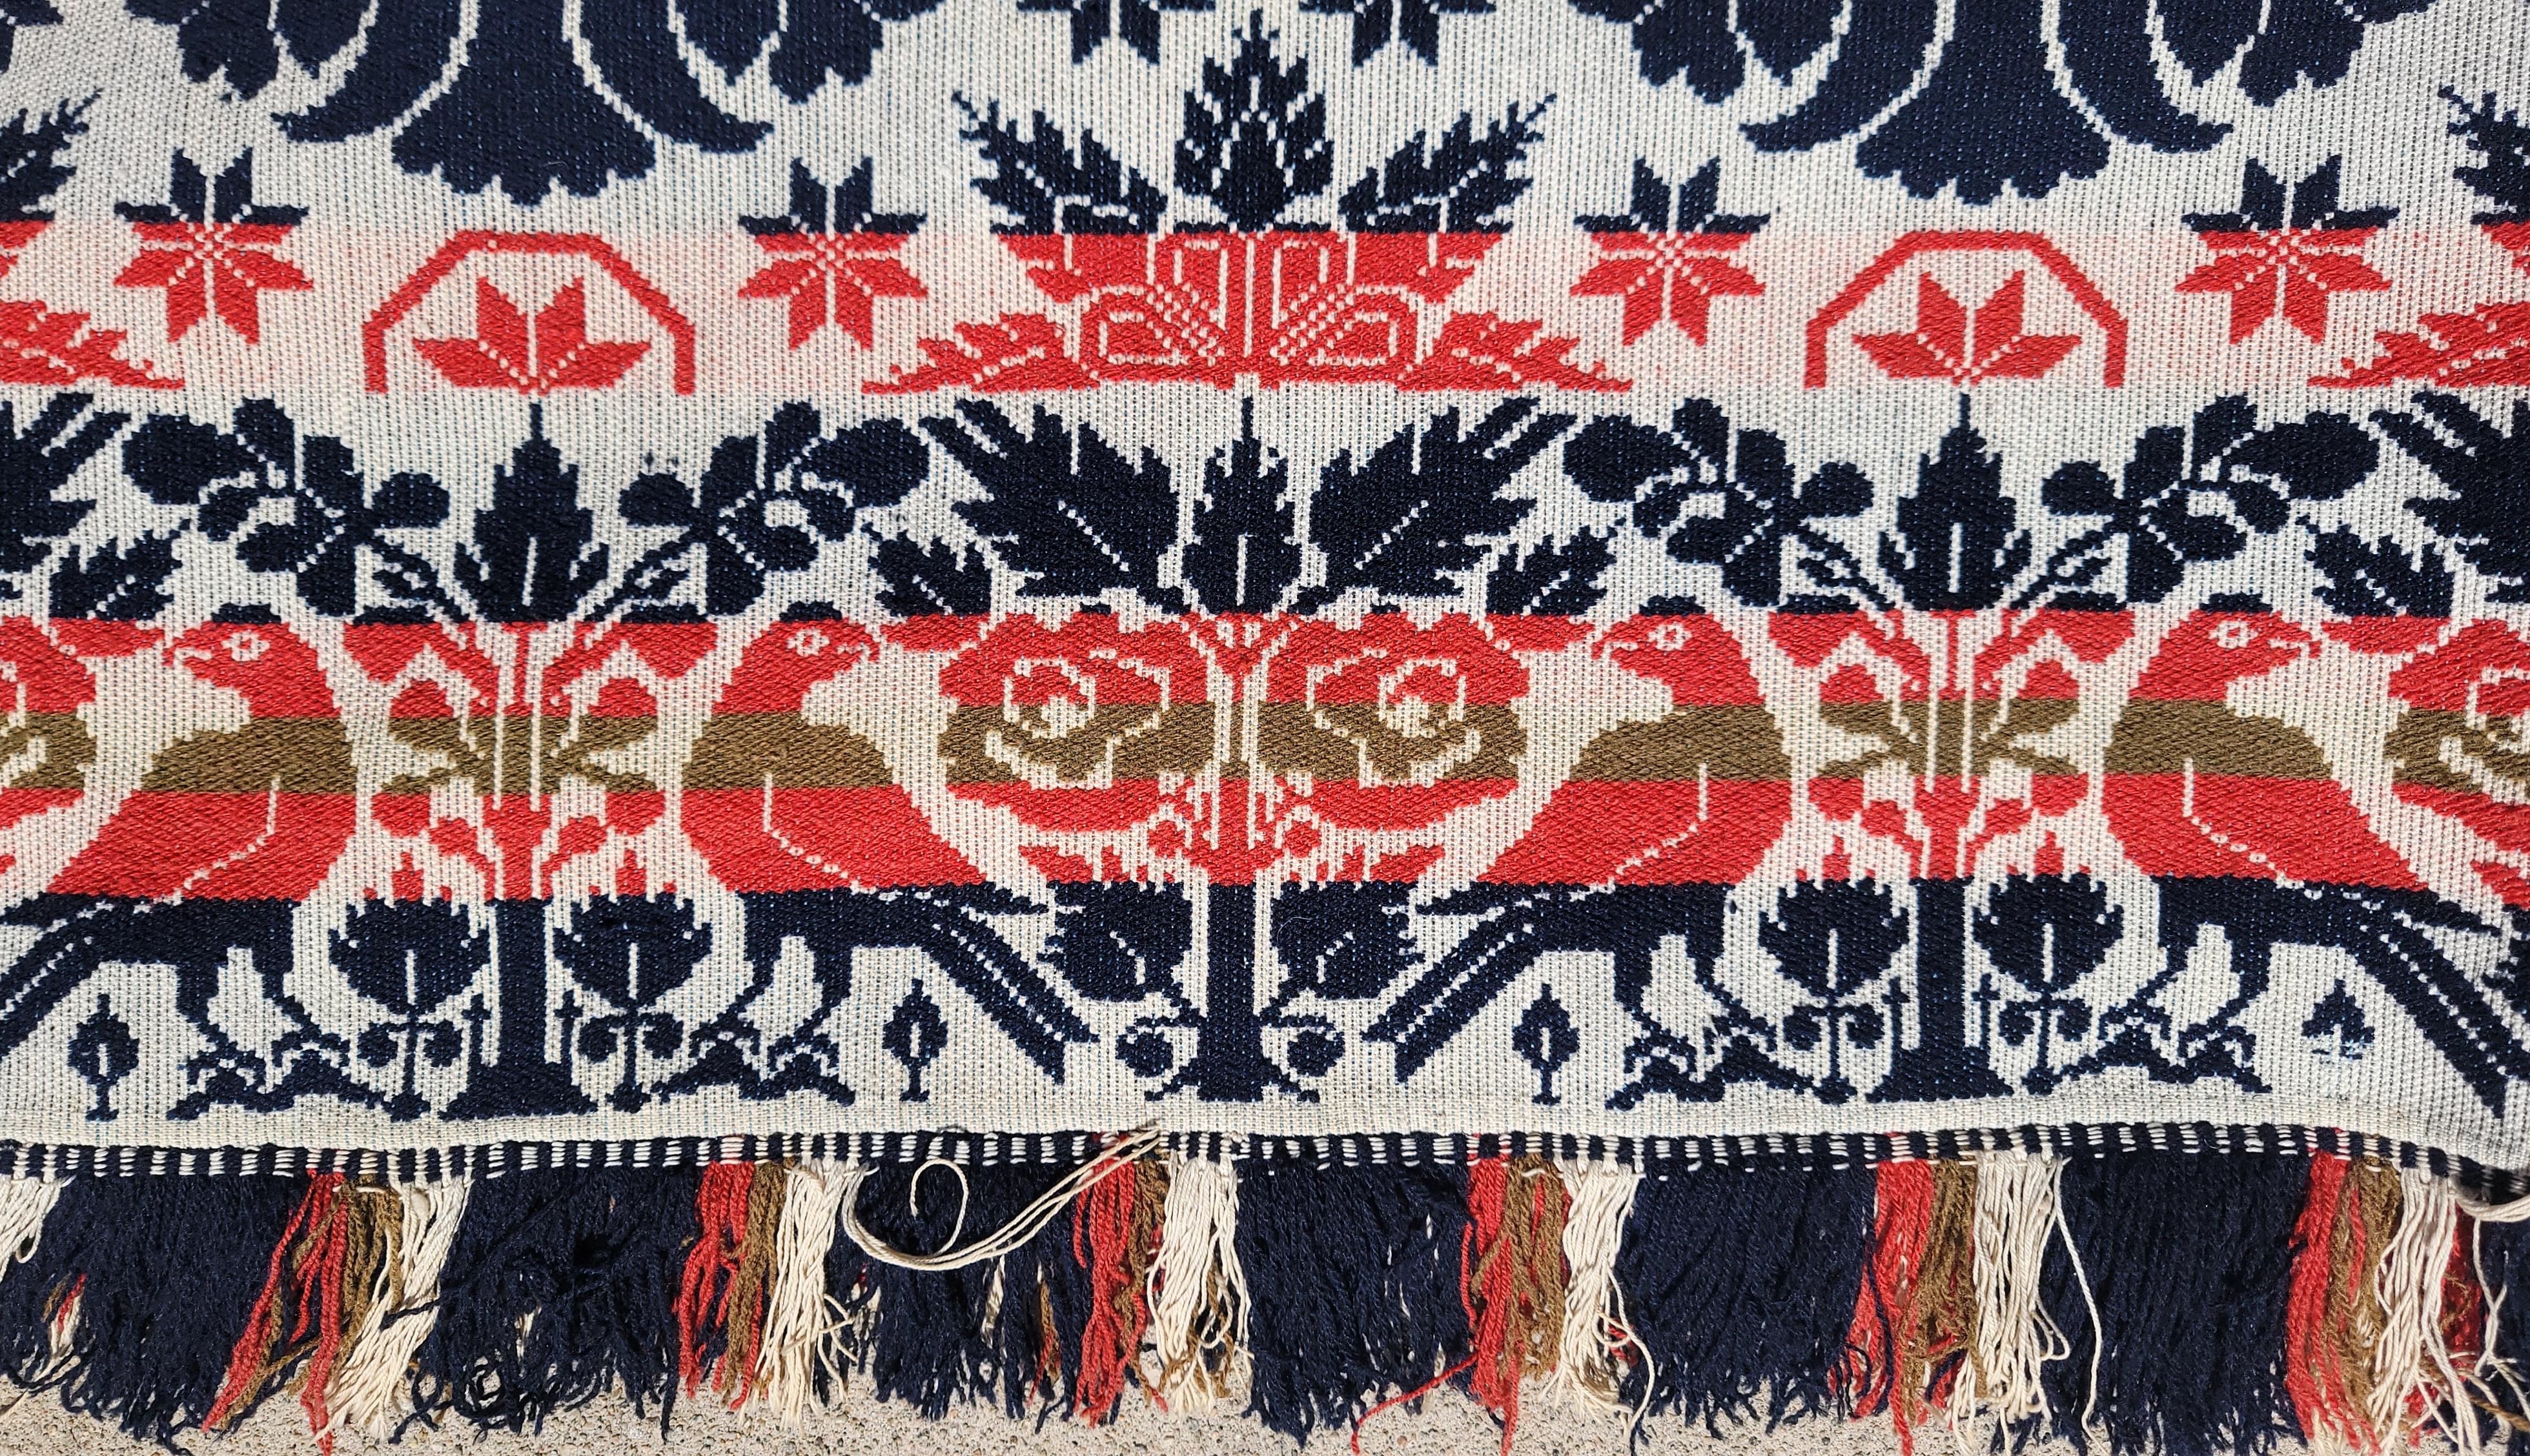 Hand-Woven Pennsylvania Dated 1845 Woven Jacquard Coverlet For Sale